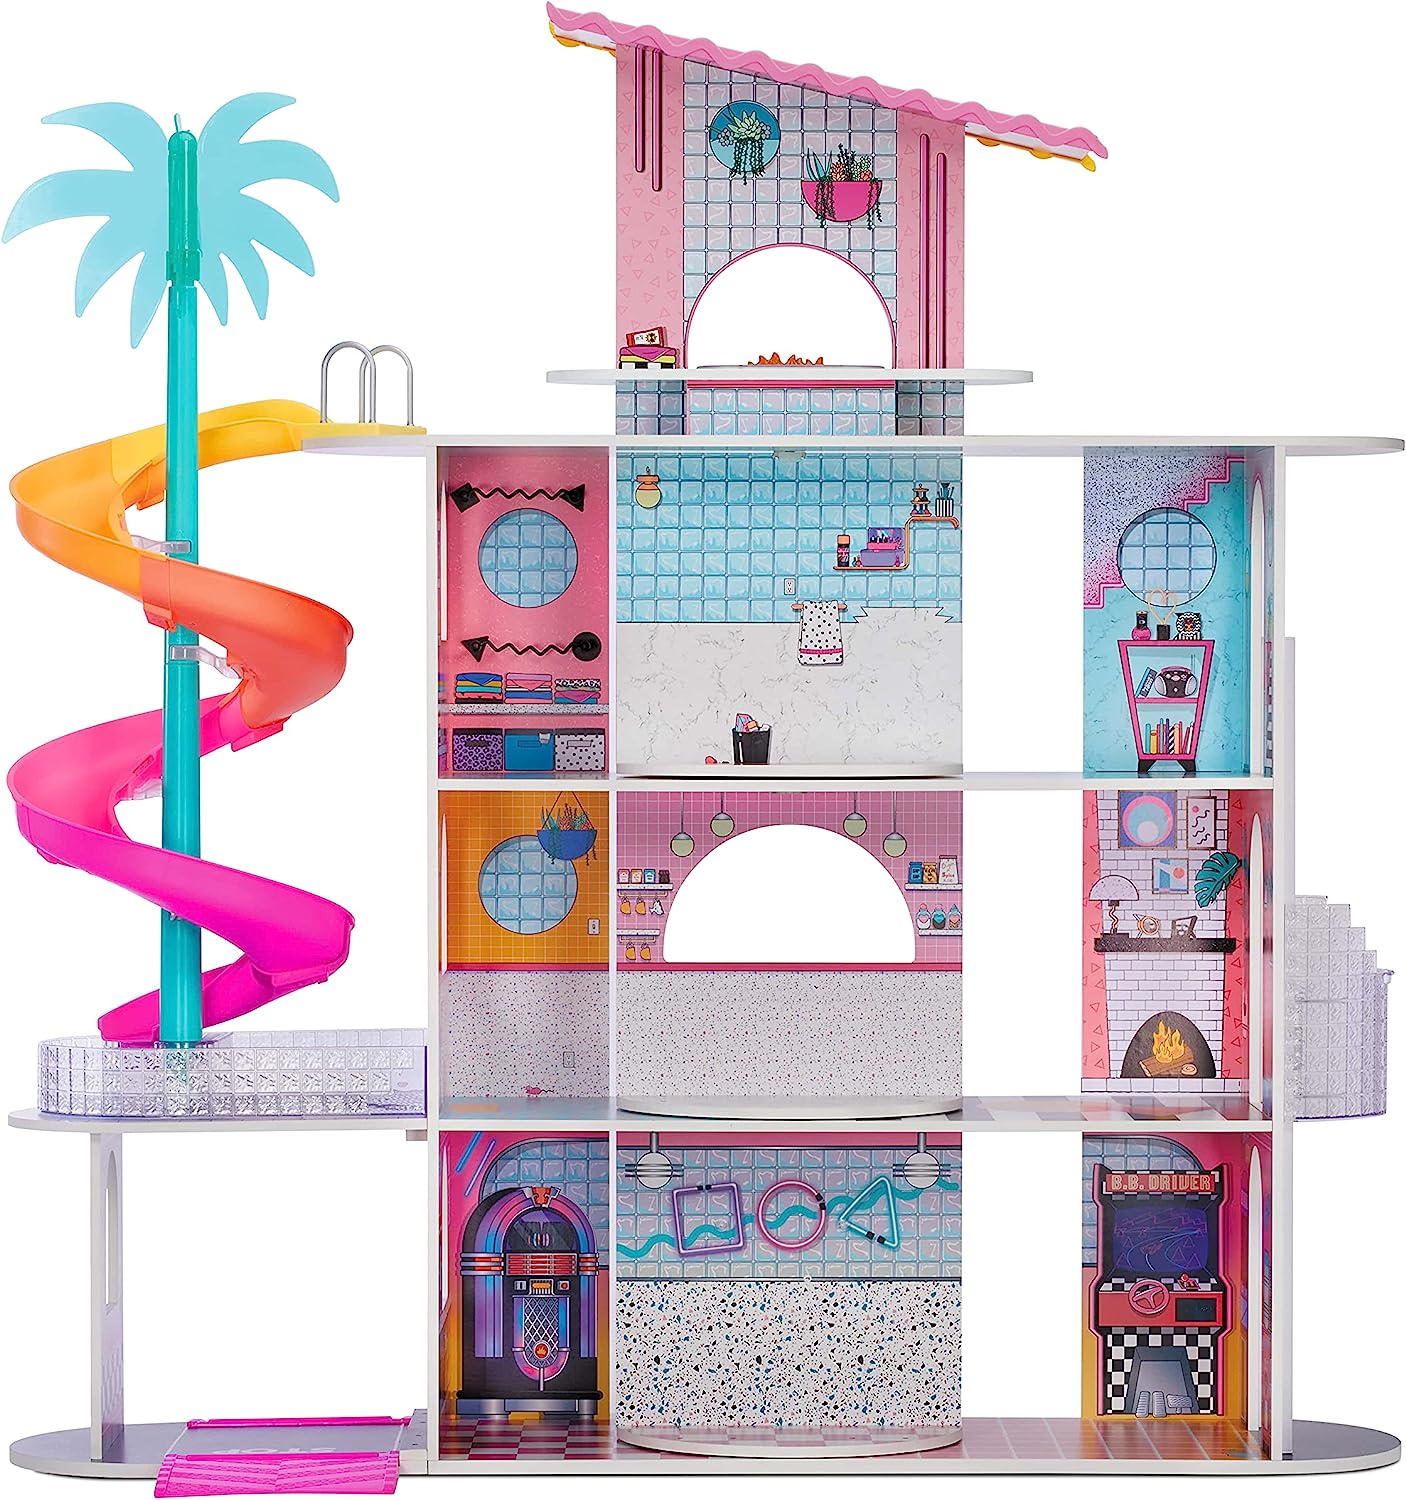  L.O.L. Surprise! OMG House of Surprises – Real Wood Dollhouse  with 85+ Surprises, 4 Floors, 10 Rooms, Elevator, Spiral Slide, Pool, Movie  Theater Drive Thru, Rooftop- Toy Gift for Girls Ages